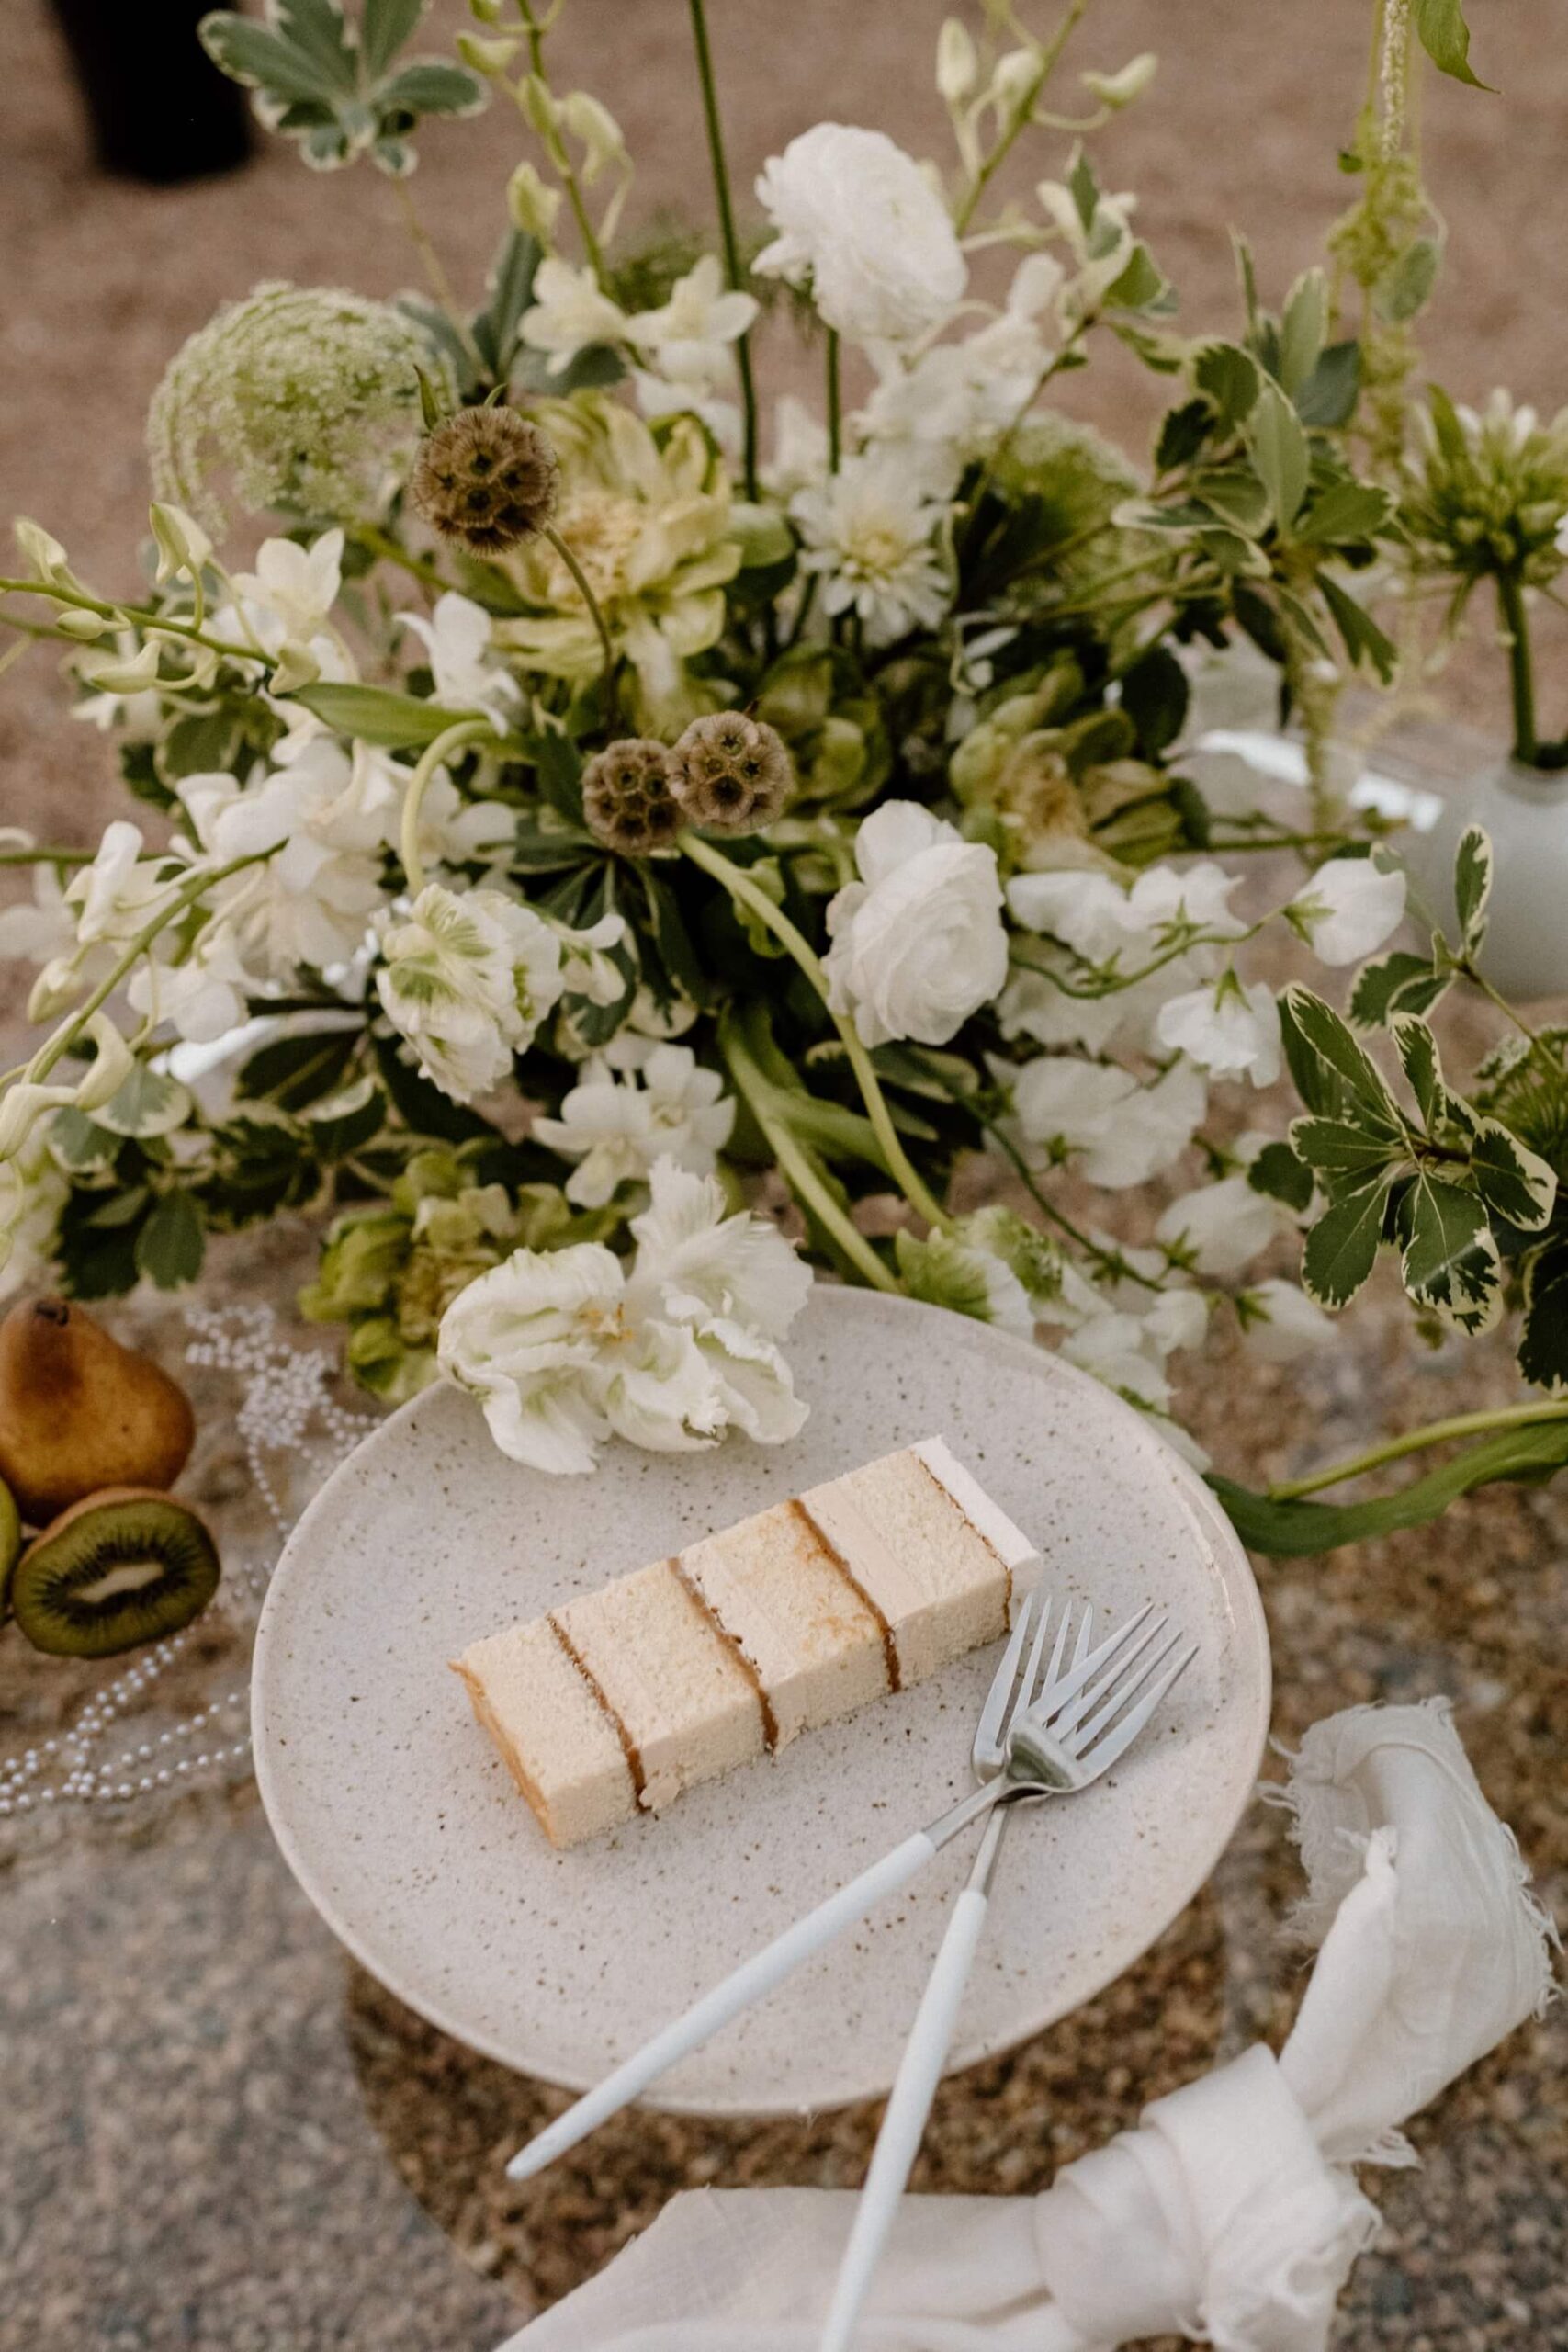 Slice of cake sitting on stone colored plate with green and white wedding flowers in the background 